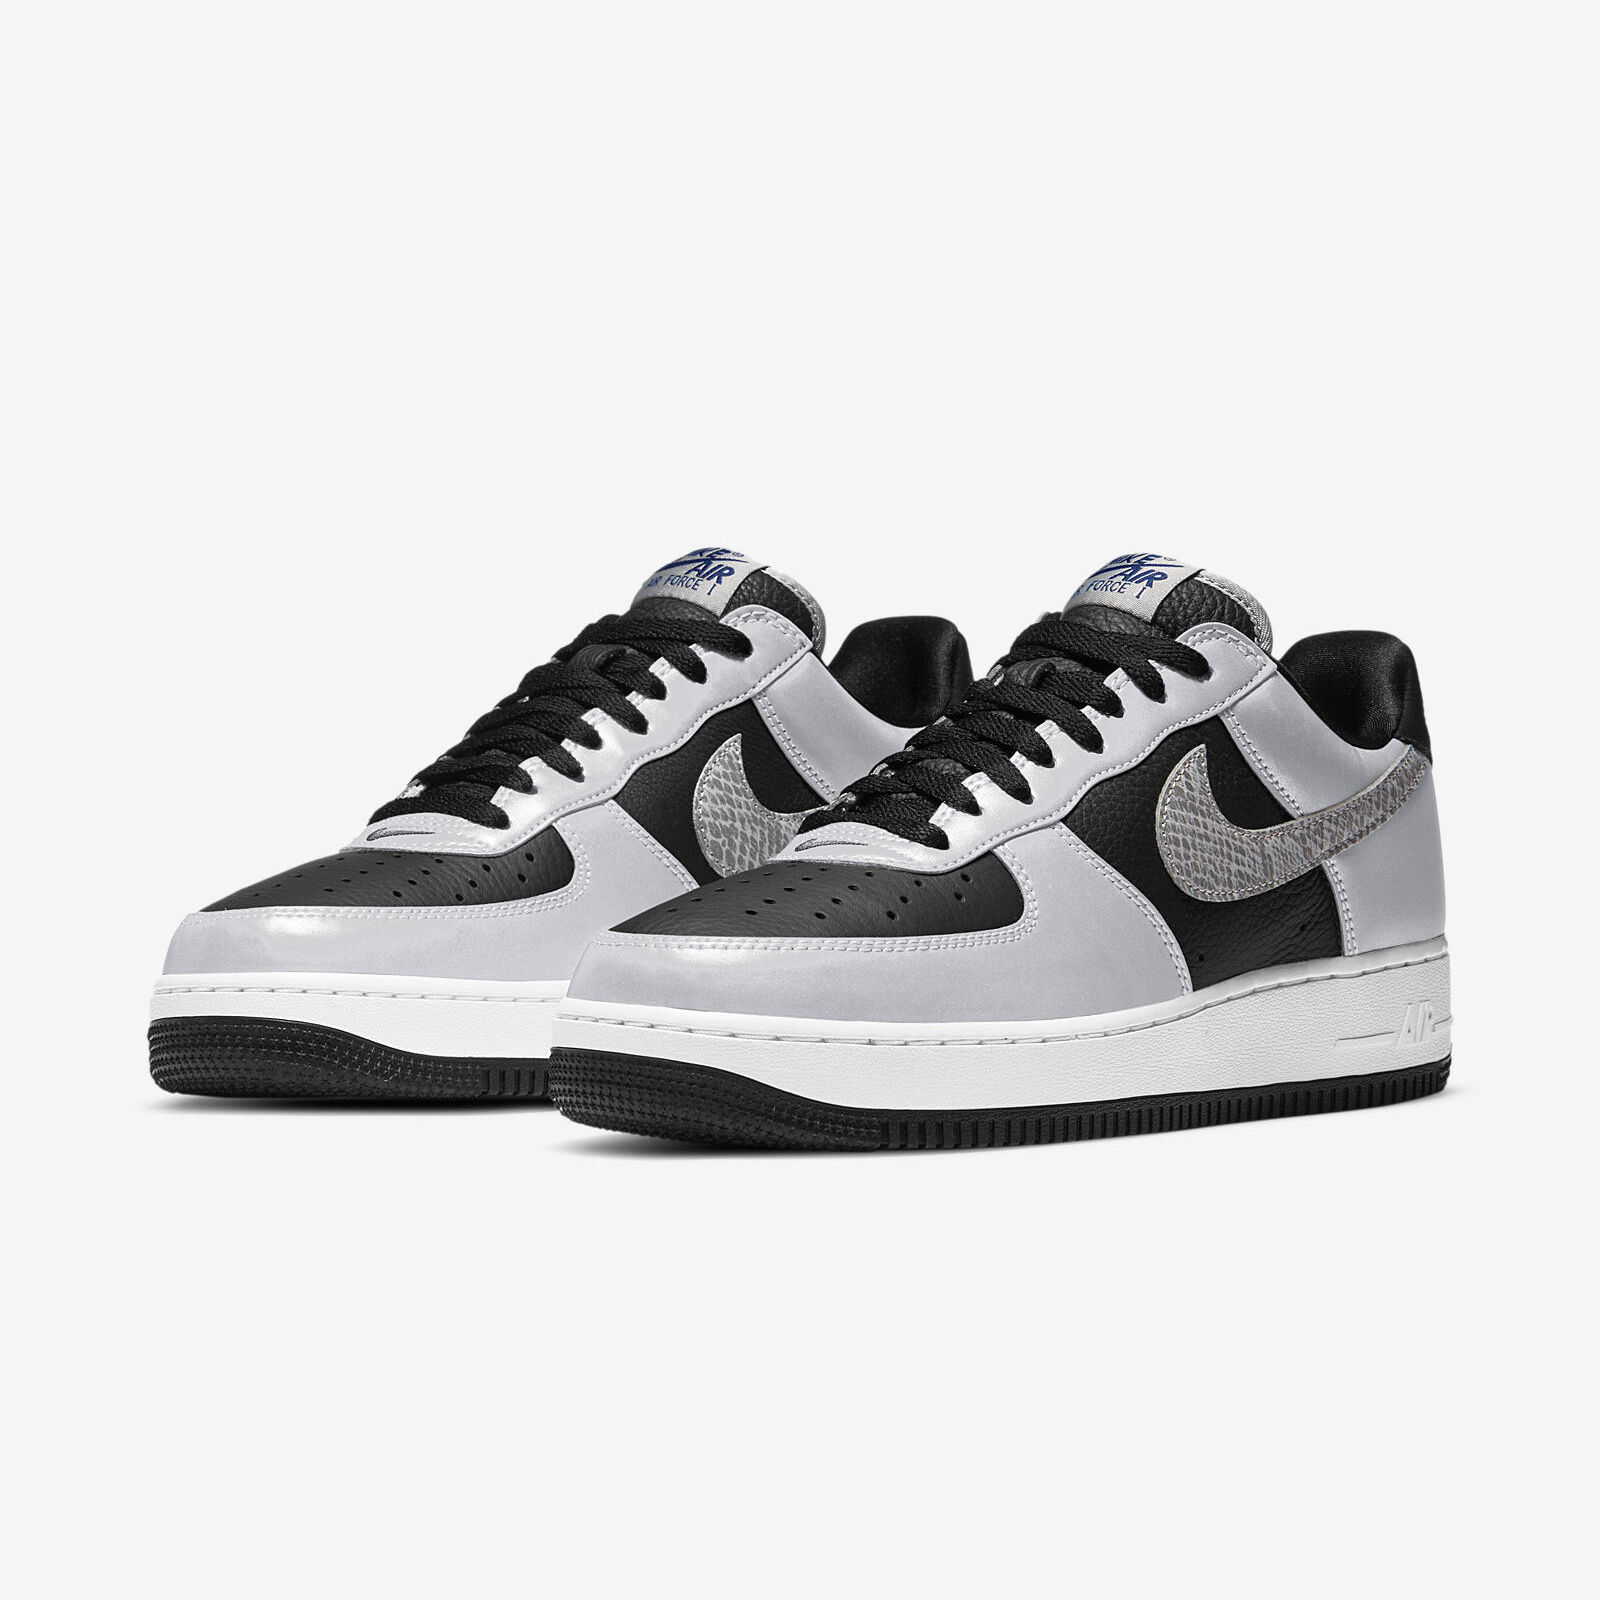 Nike Air Force 1
« Silver Snake »